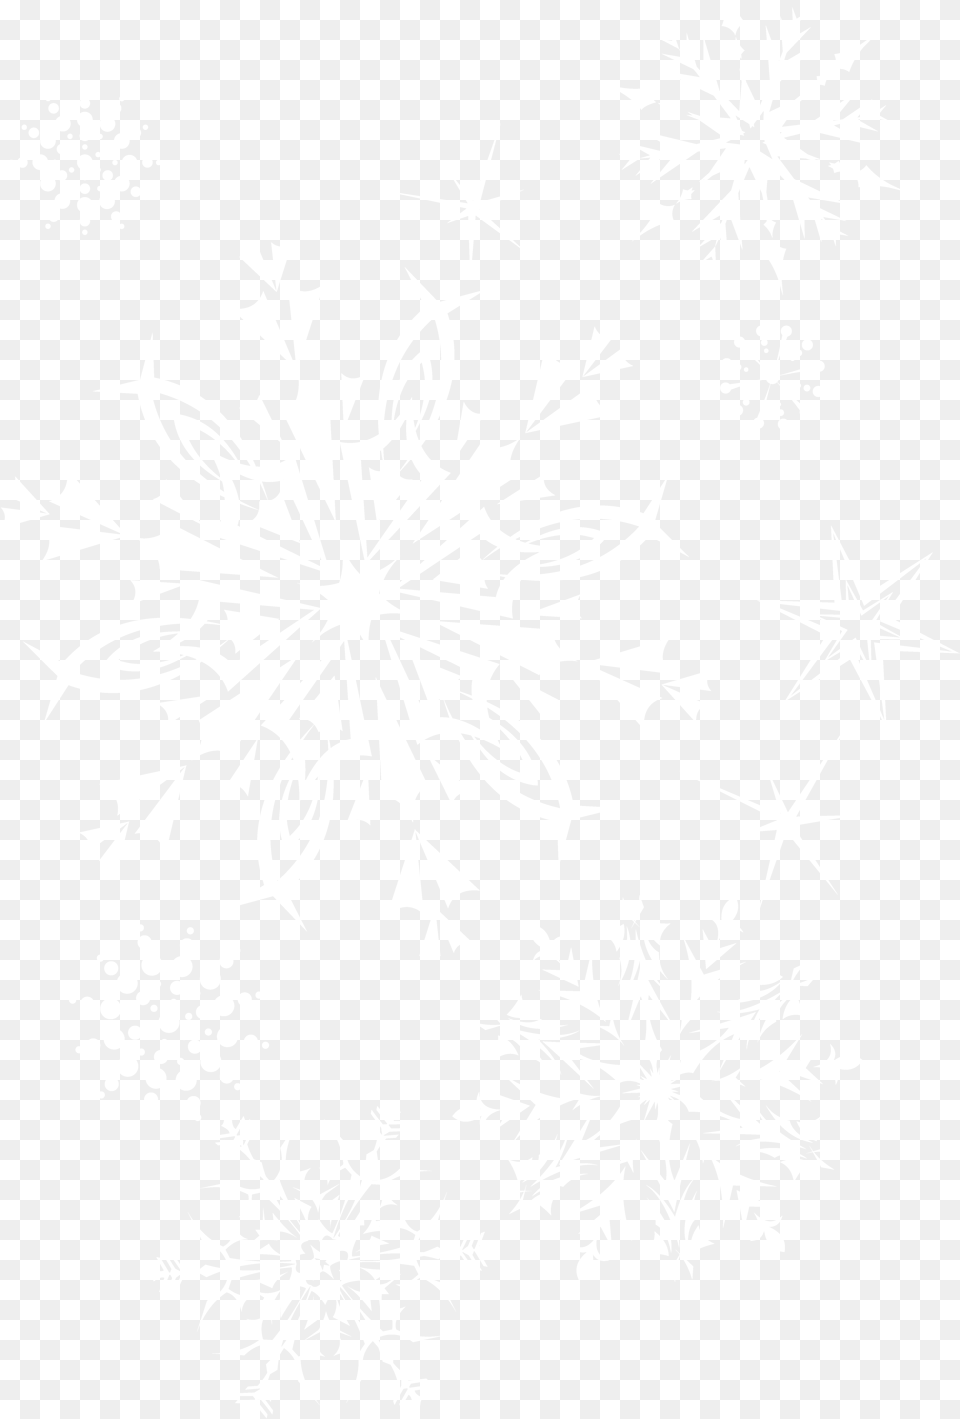 White Snowflakes Christmas Background For Profile, Art, Floral Design, Graphics, Pattern Png